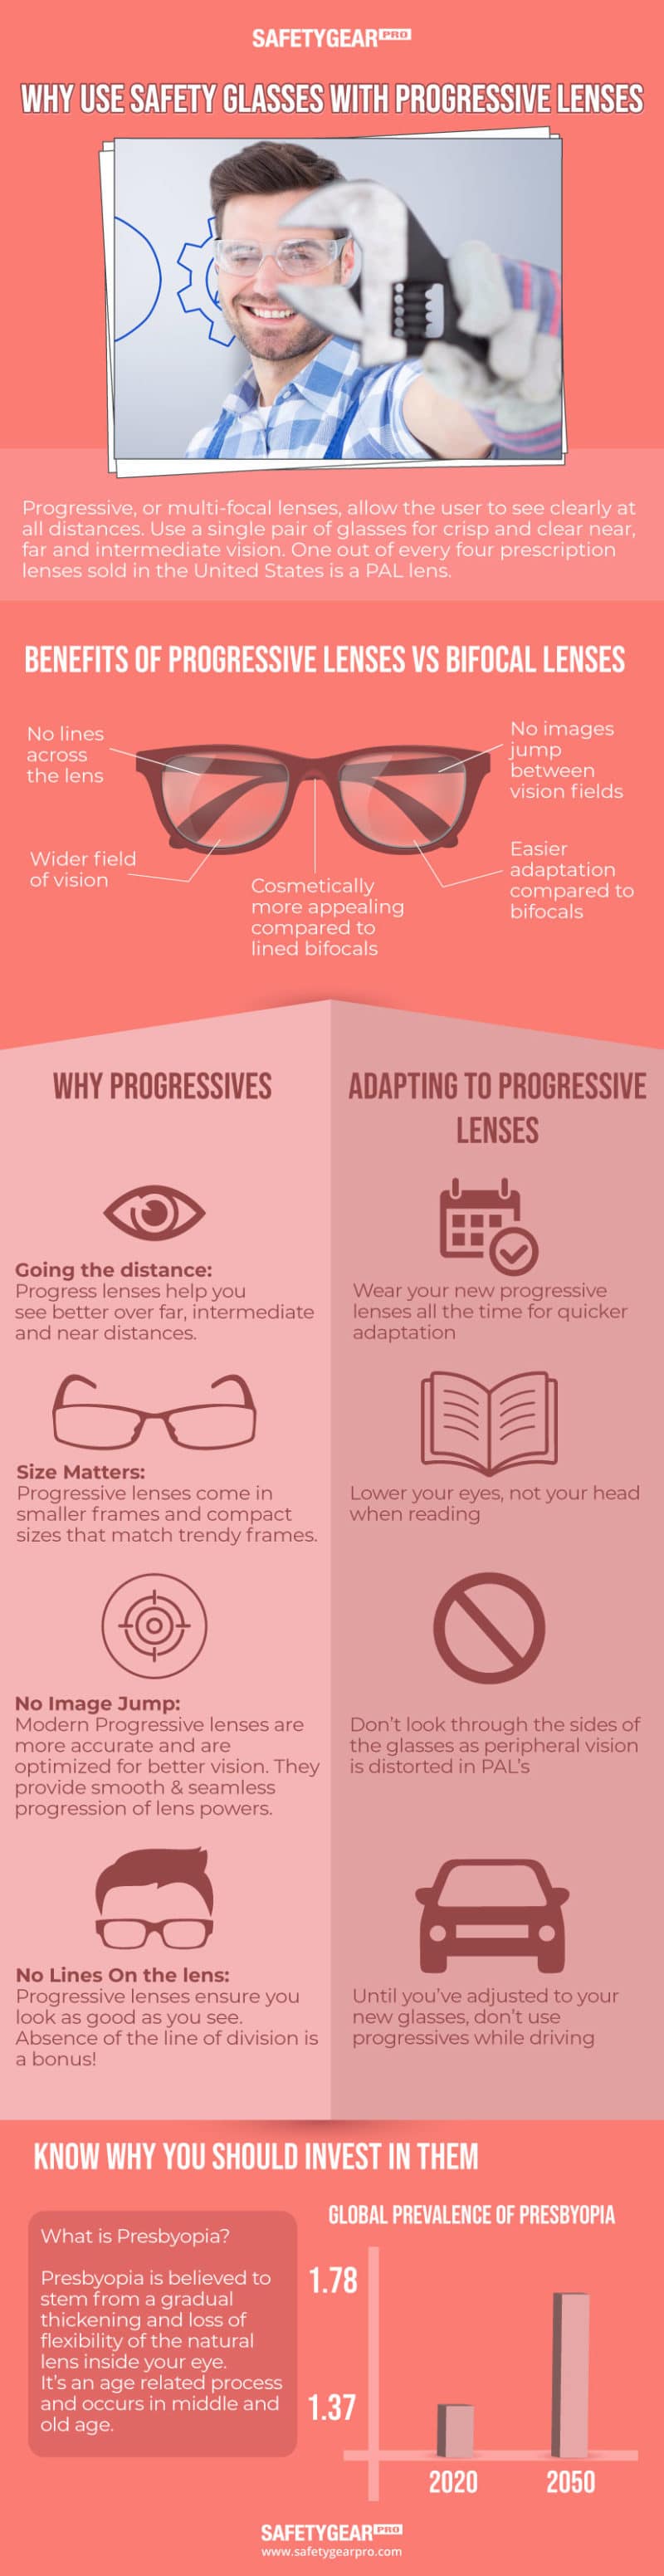 Why Use Safety Glasses With Progressive Lenses? Infographic